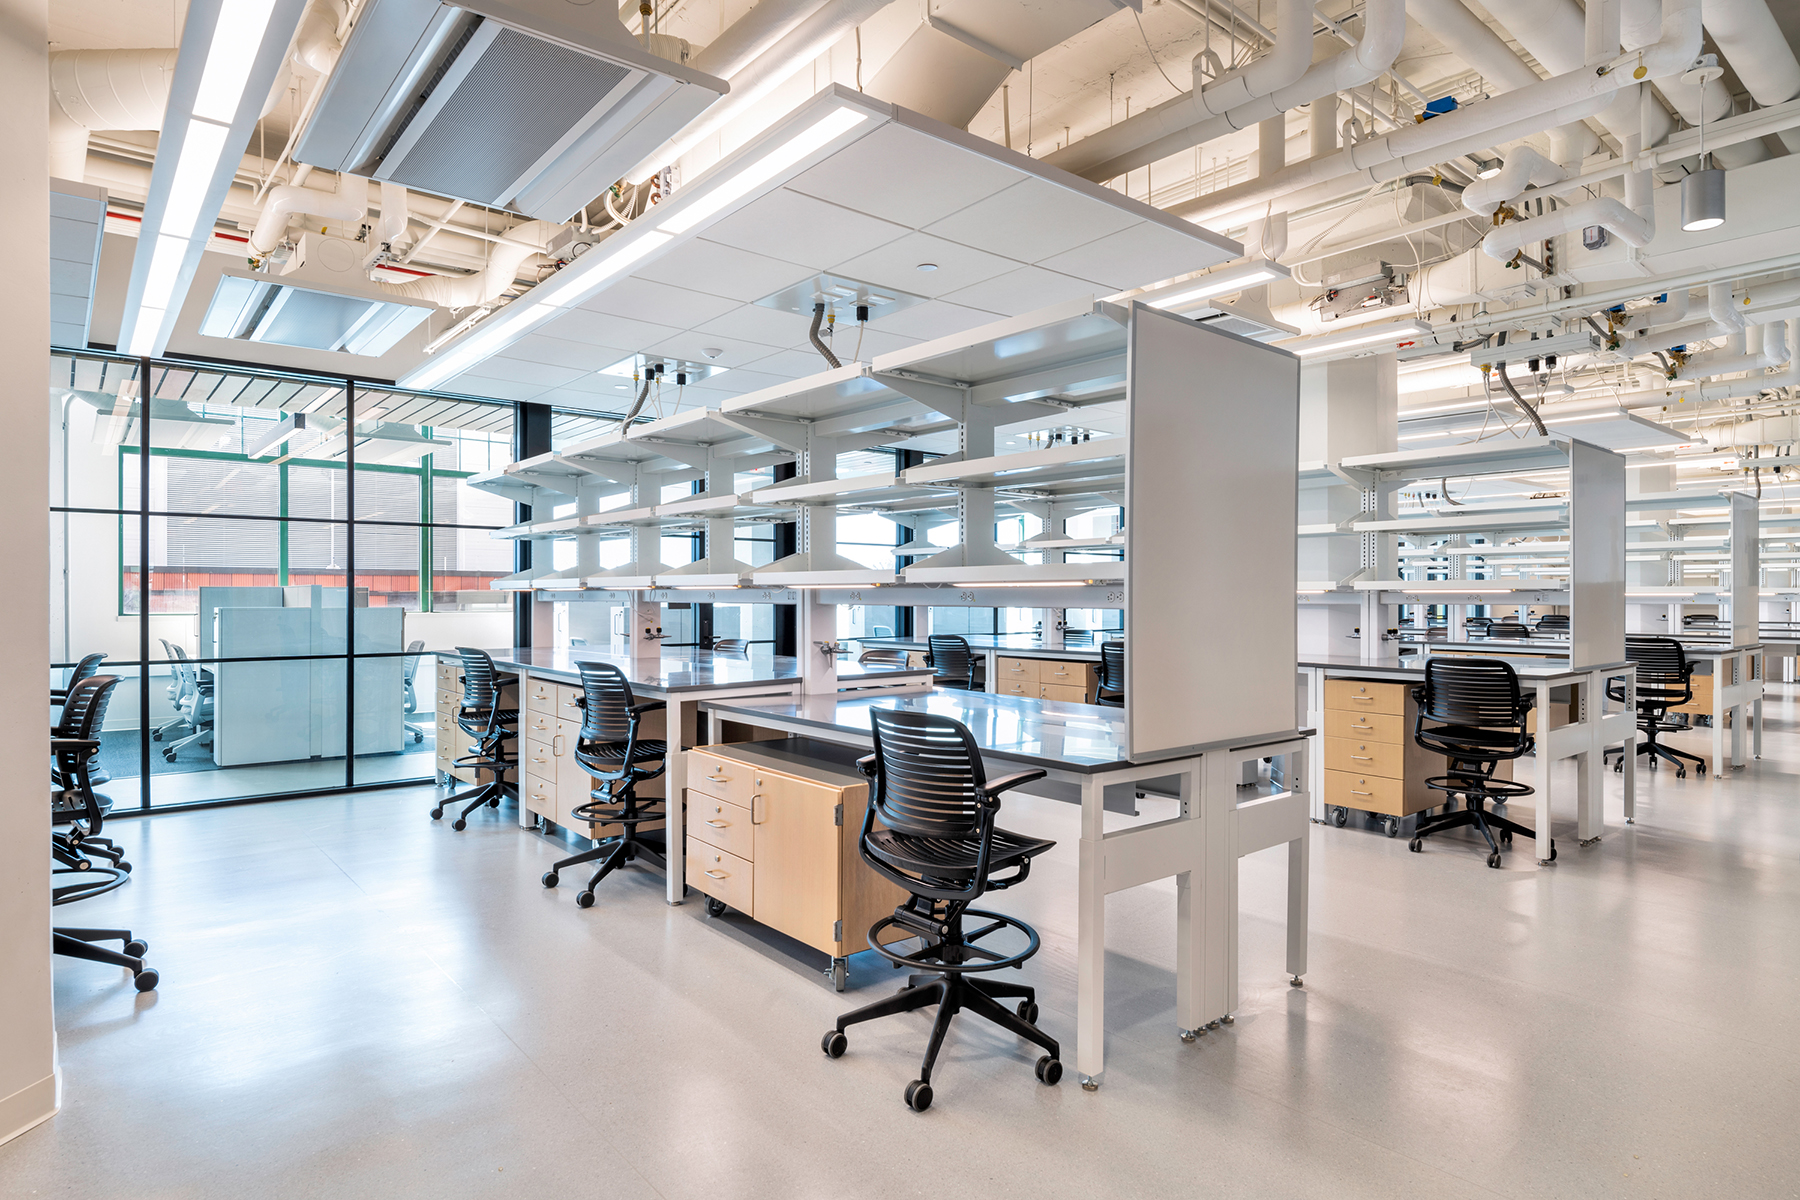 Lab space after renovation work. (Courtesy Triggs Photography)